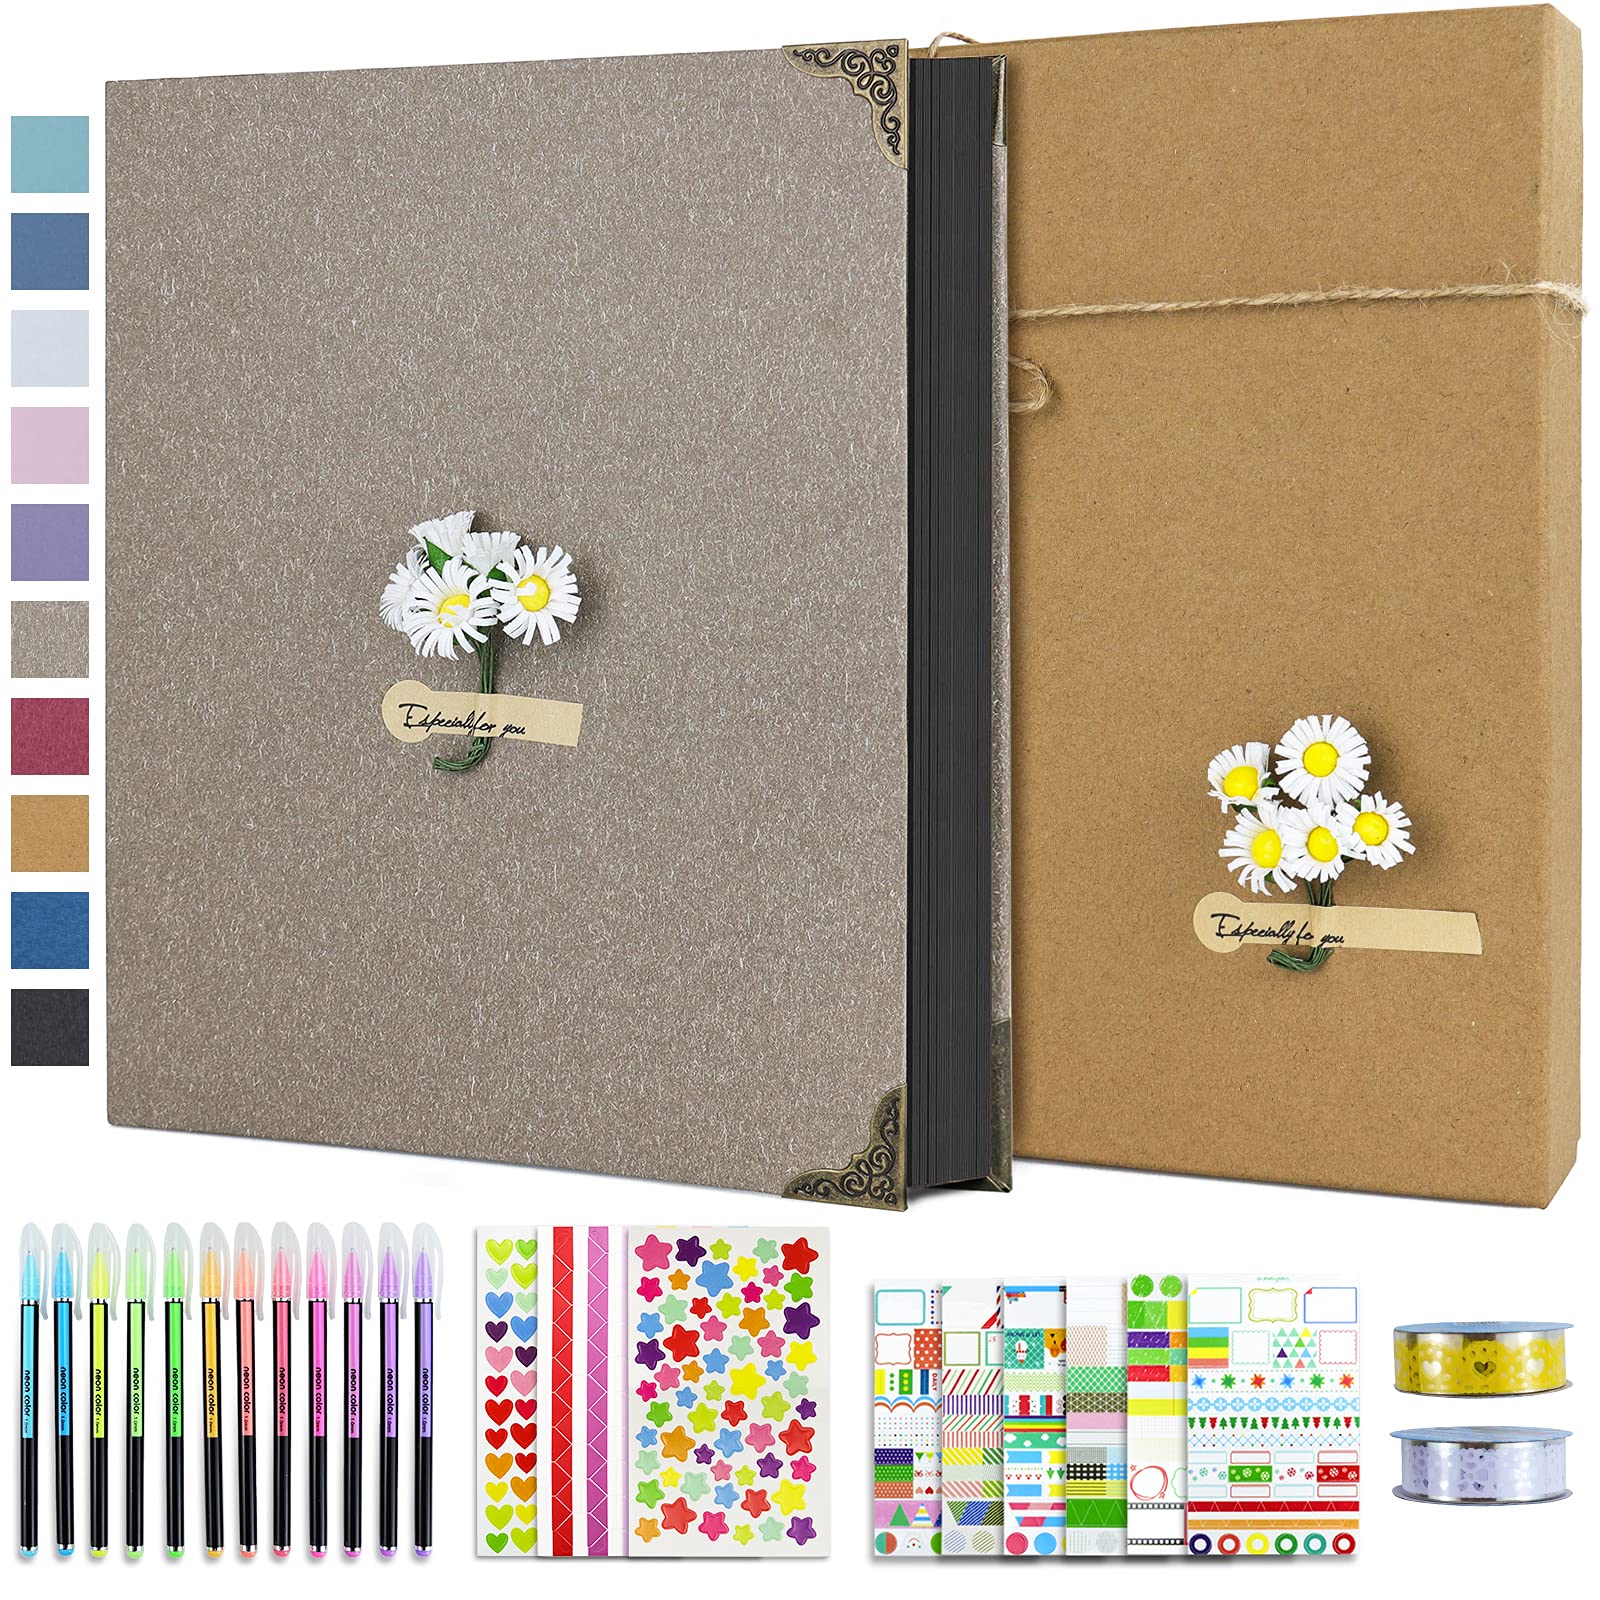 Vienrose Diy Scrapbook Photo Album Kit With Pens Tapes And Stickers 60  Pages Hardcover 85X11 Inches 3 Rings Removable Black Pape